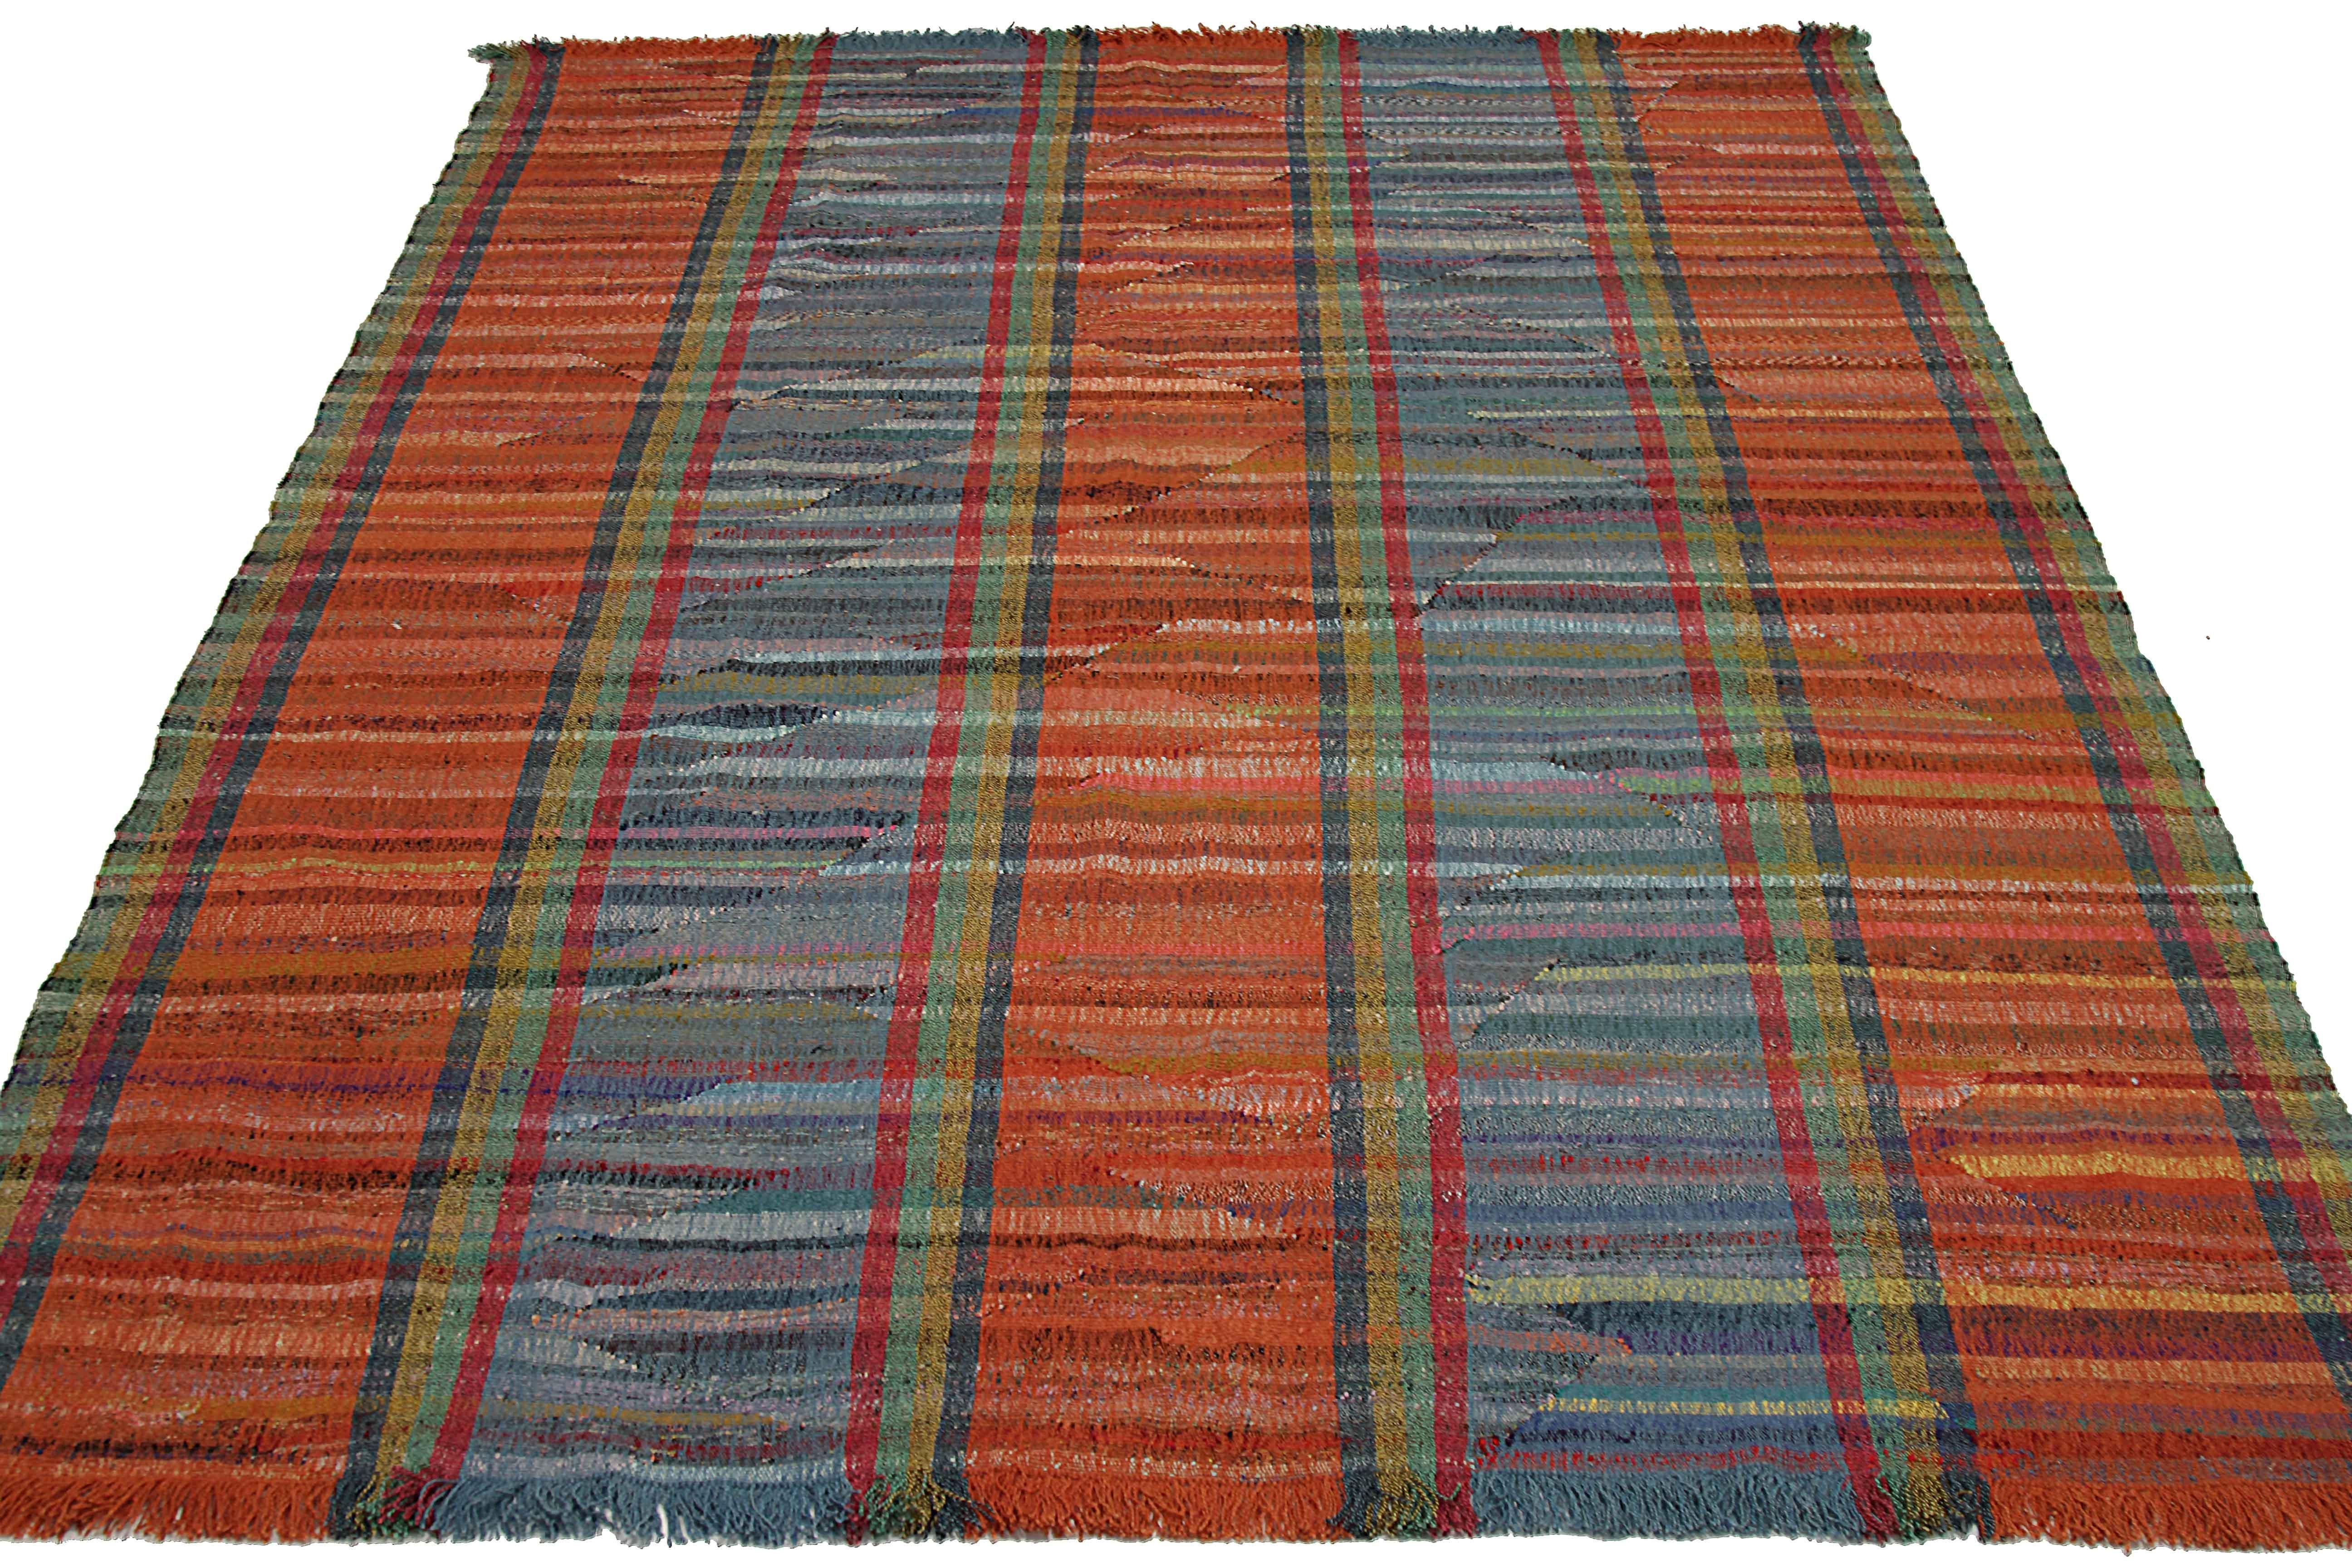 New Turkish rug handwoven from wool taken from antique fine carpets. It’s a traditional Kilim weaving featuring colored stripes over an ivory field. It’s a stunning piece to get for contemporary and modern spaces. It has a dimension of 10’1” x